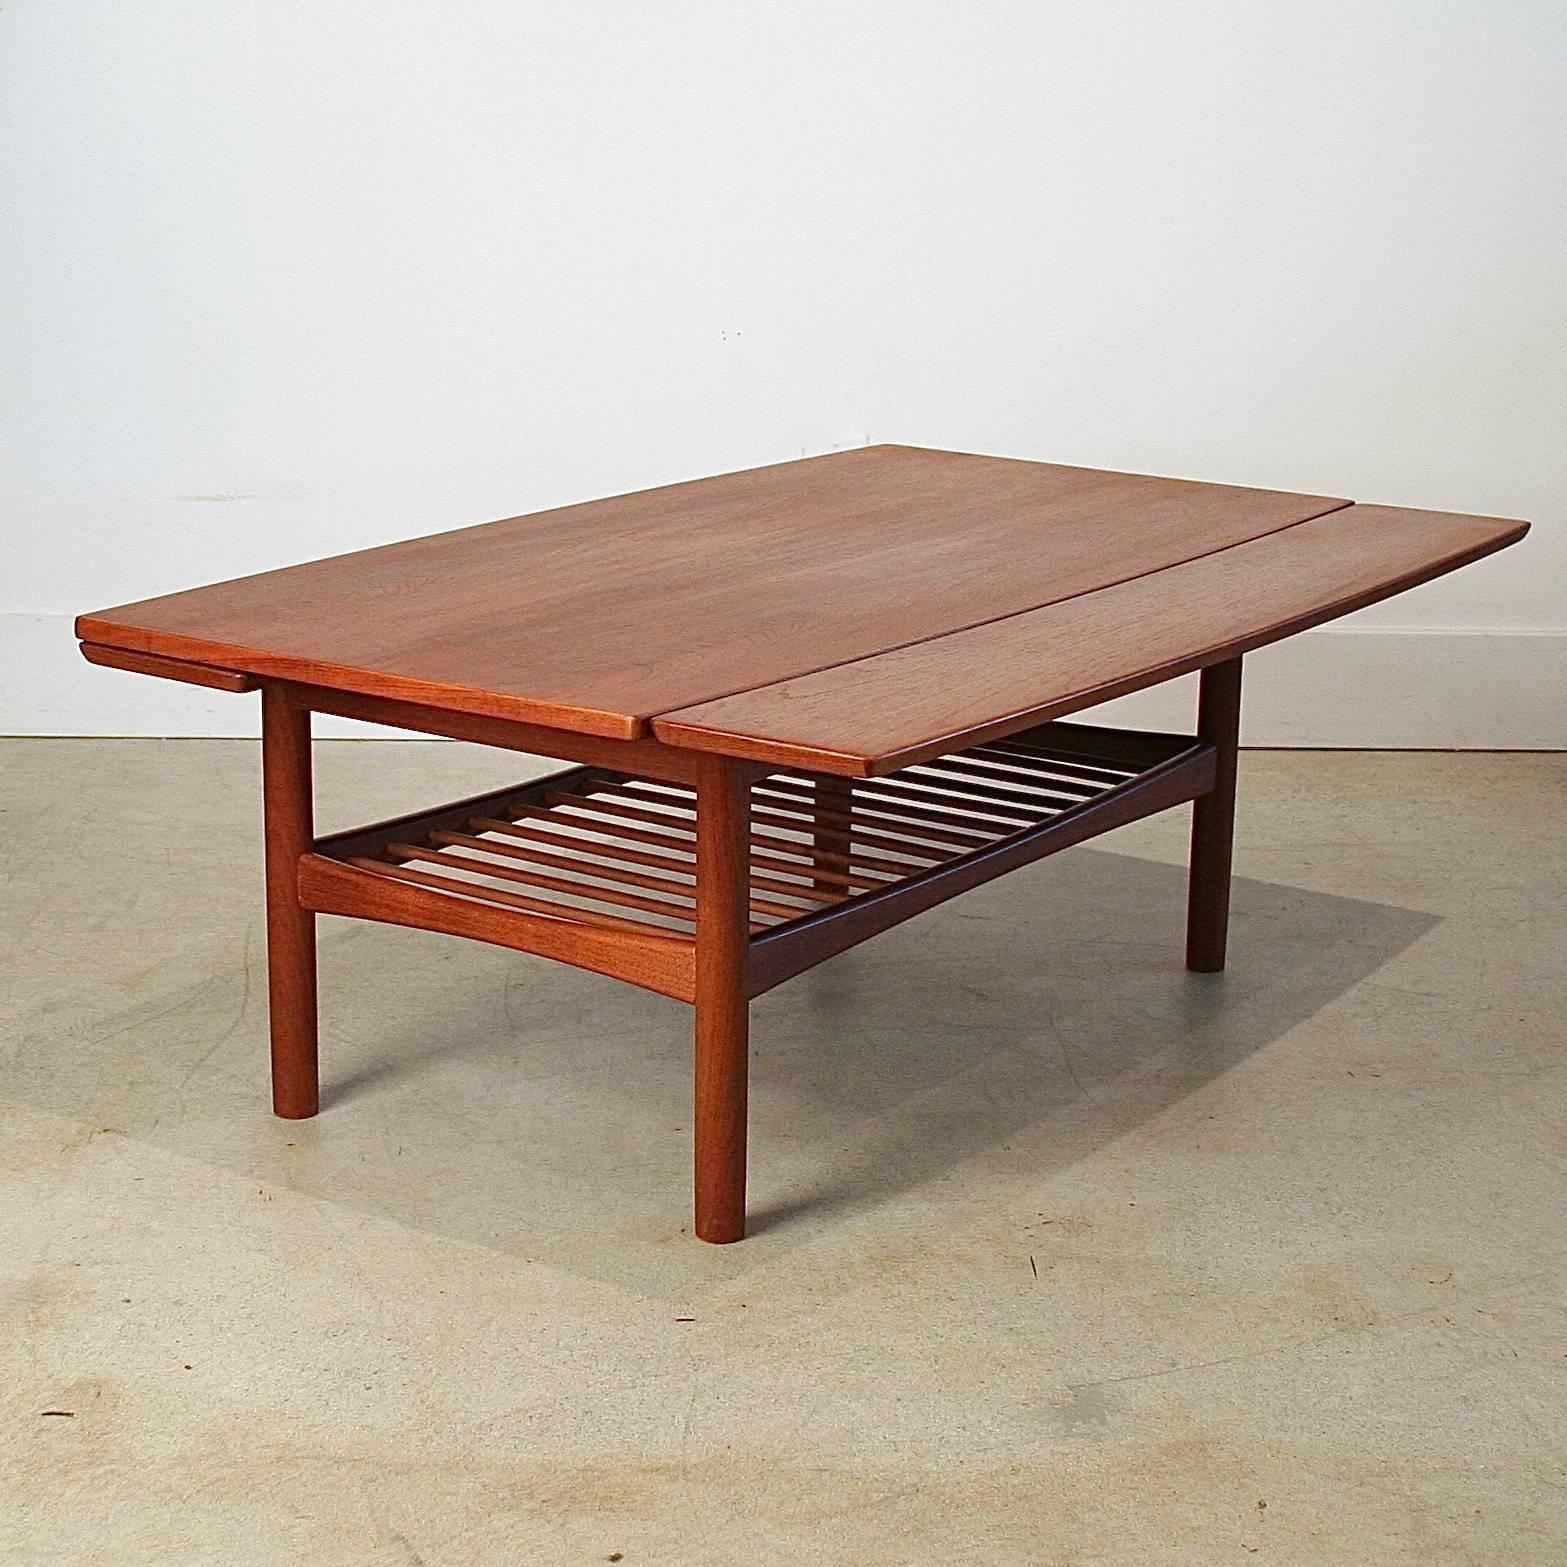 Beautiful vintage Danish teak coffee table with draw leaves and dowel shelf. Leaves are 6.5" each. Made in Denmark.